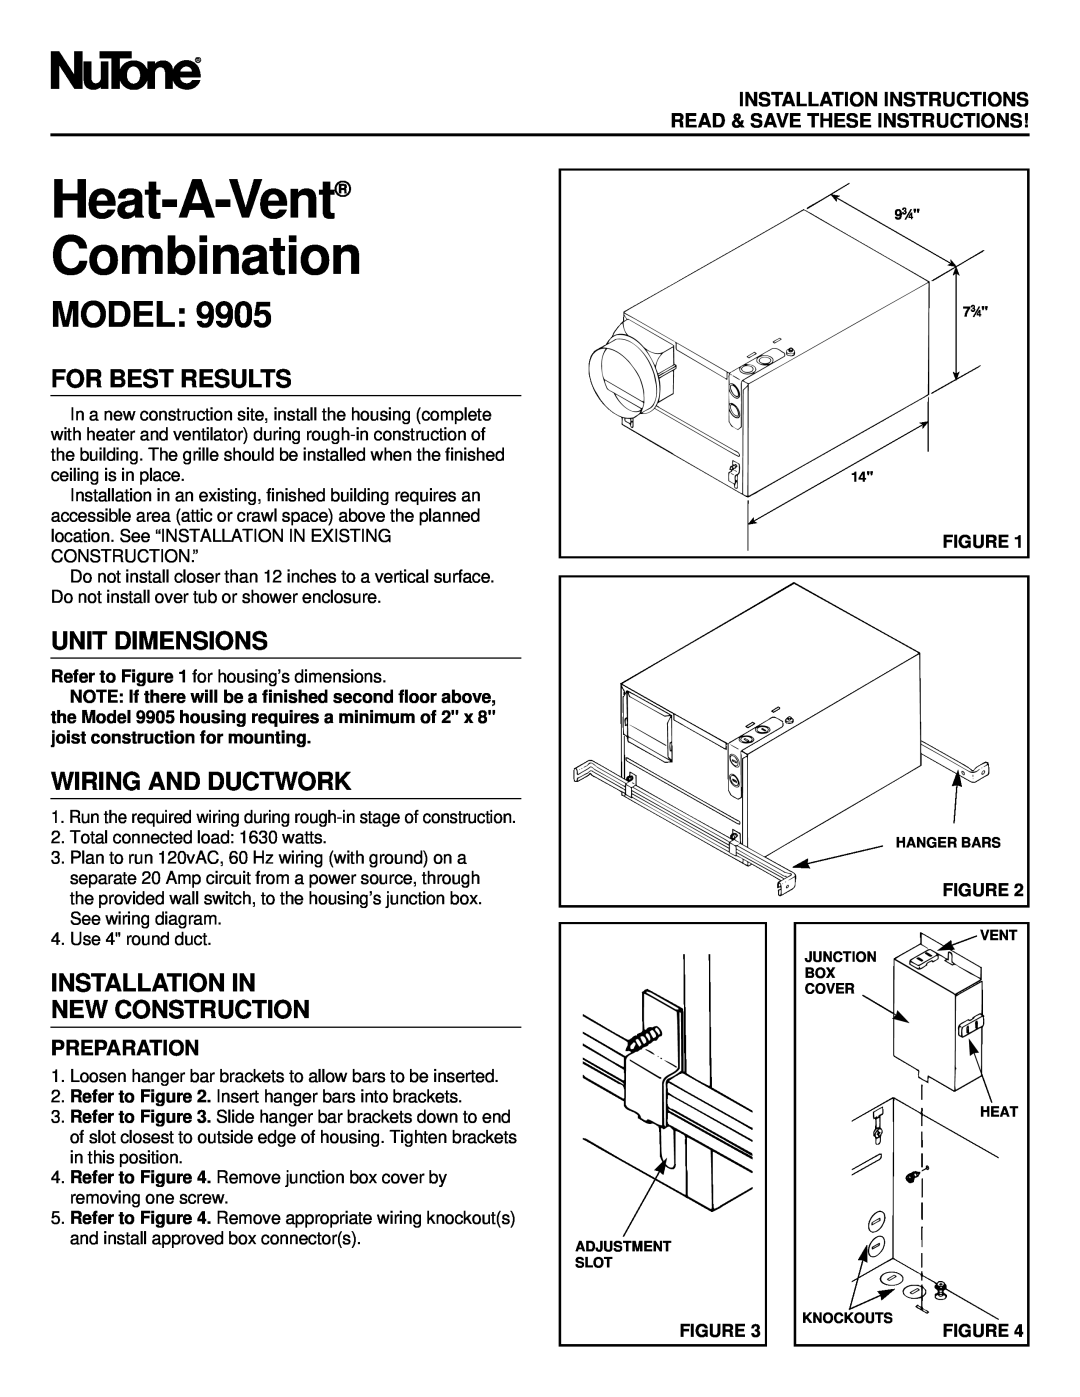 NuTone 9905 installation instructions For Best Results, Unit Dimensions, Wiring And Ductwork, Preparation, Model 